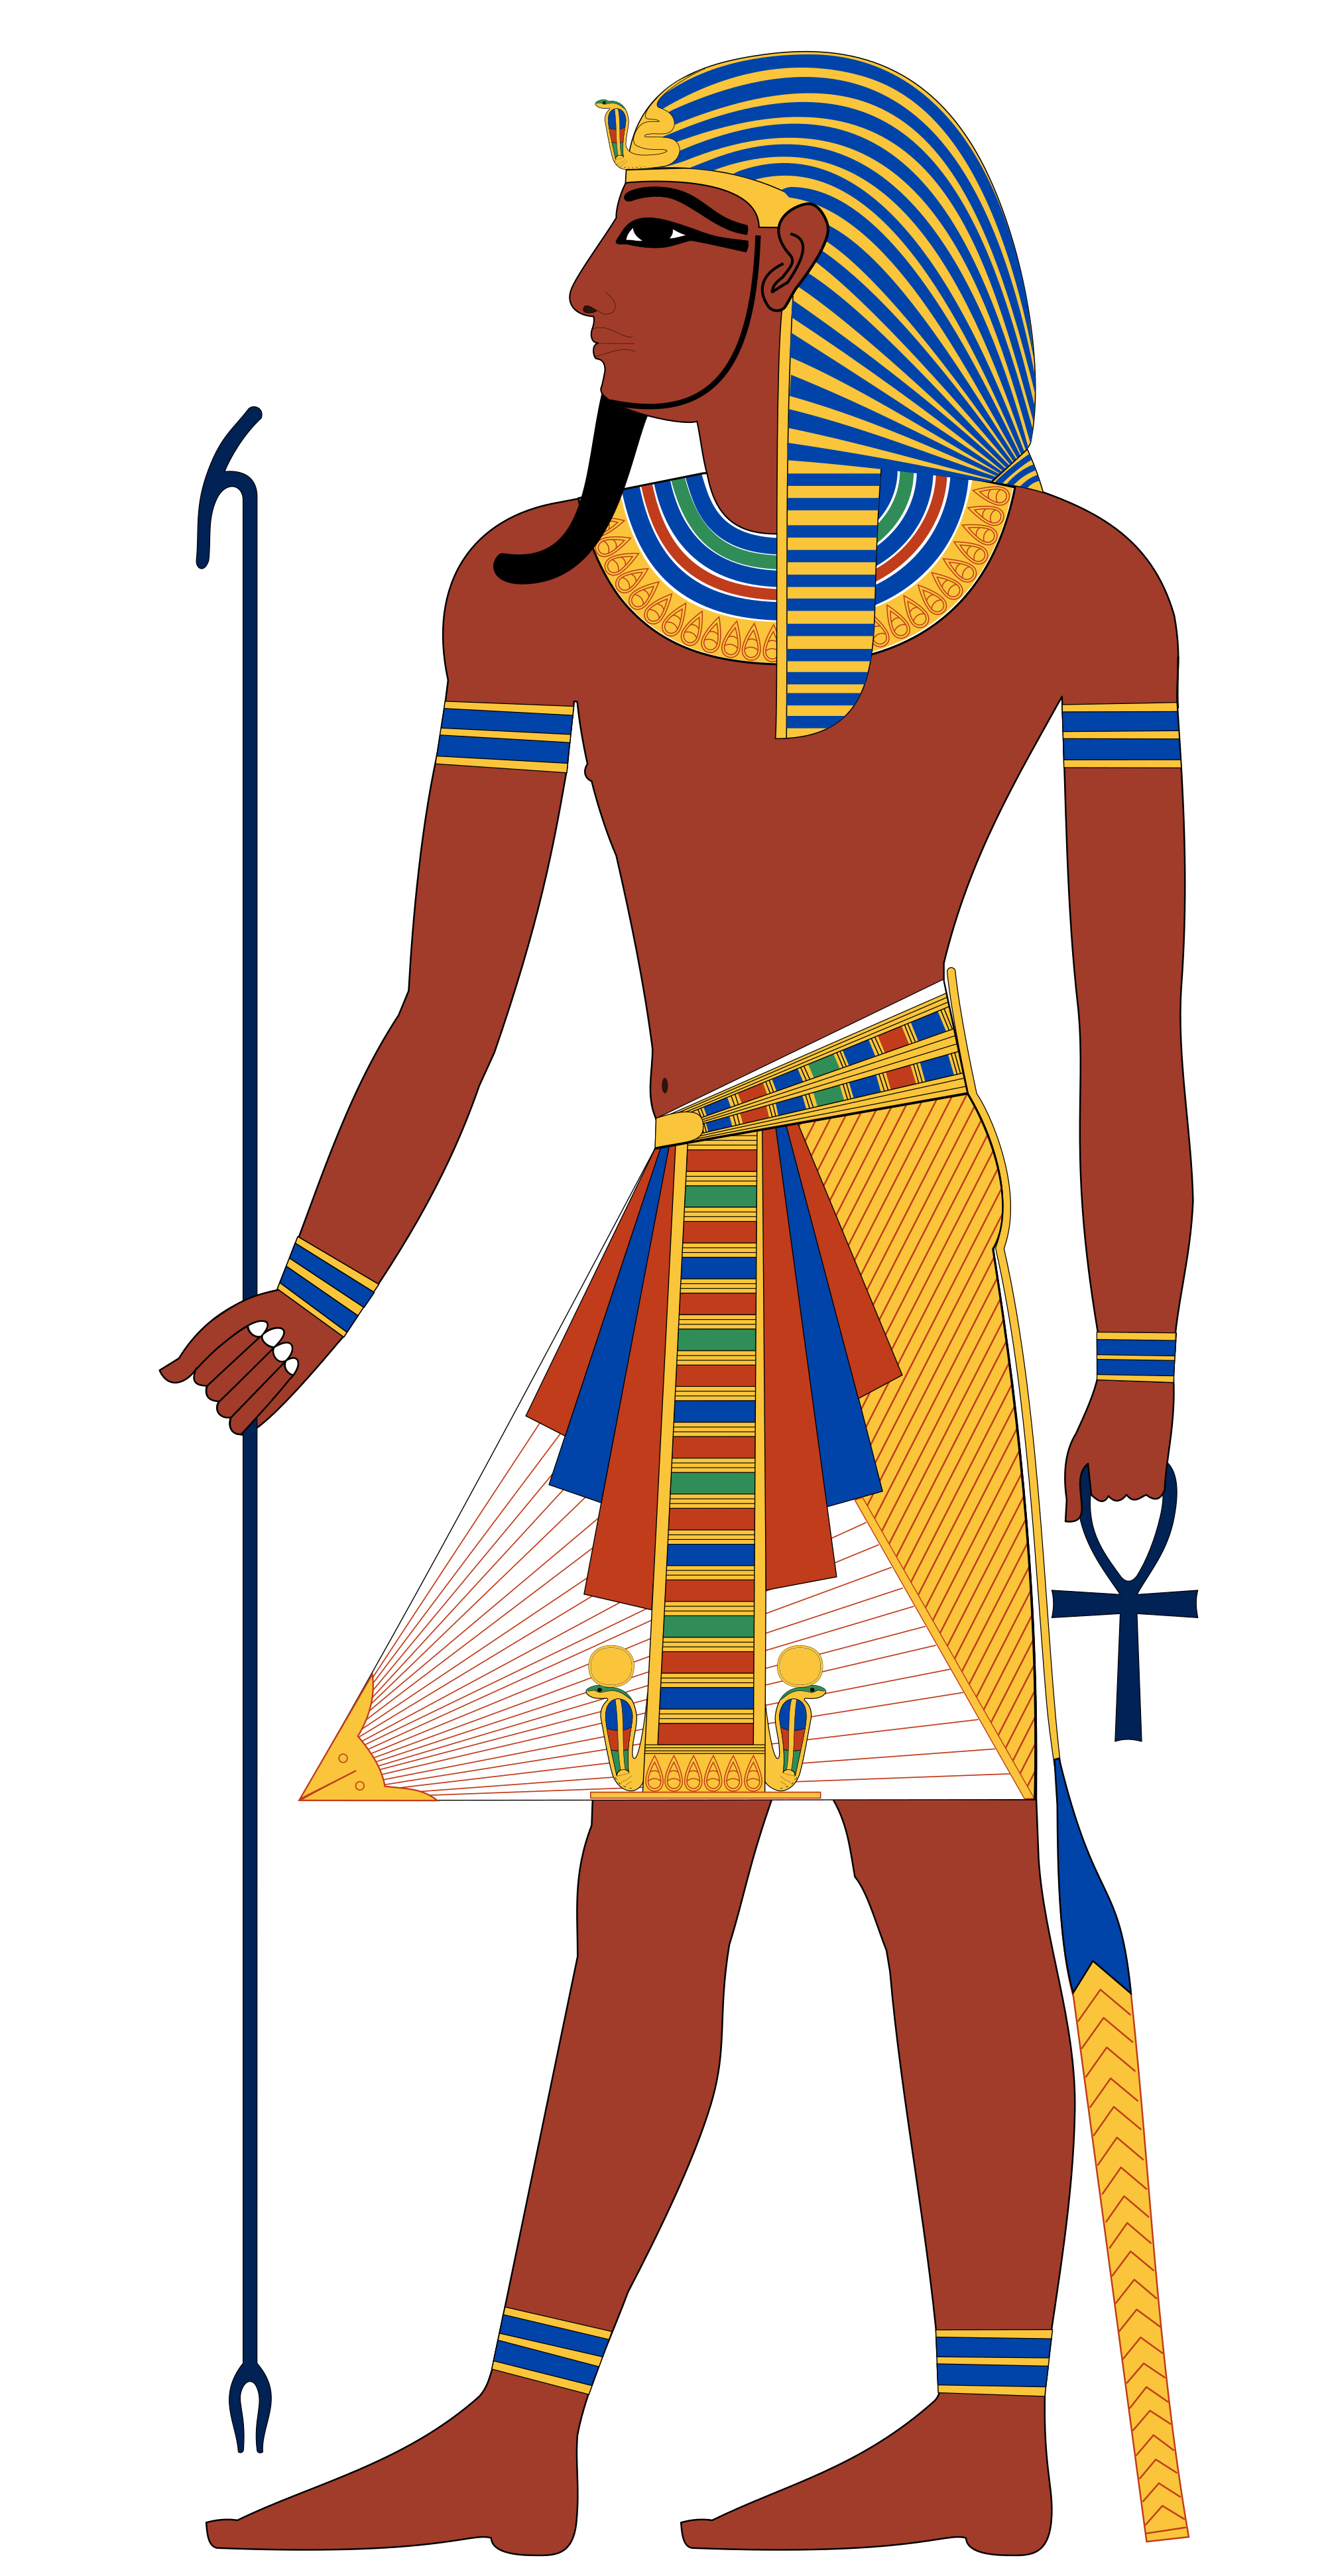 pharoah is also in us: Discovering pharoah helps us discover the Shechinah in us